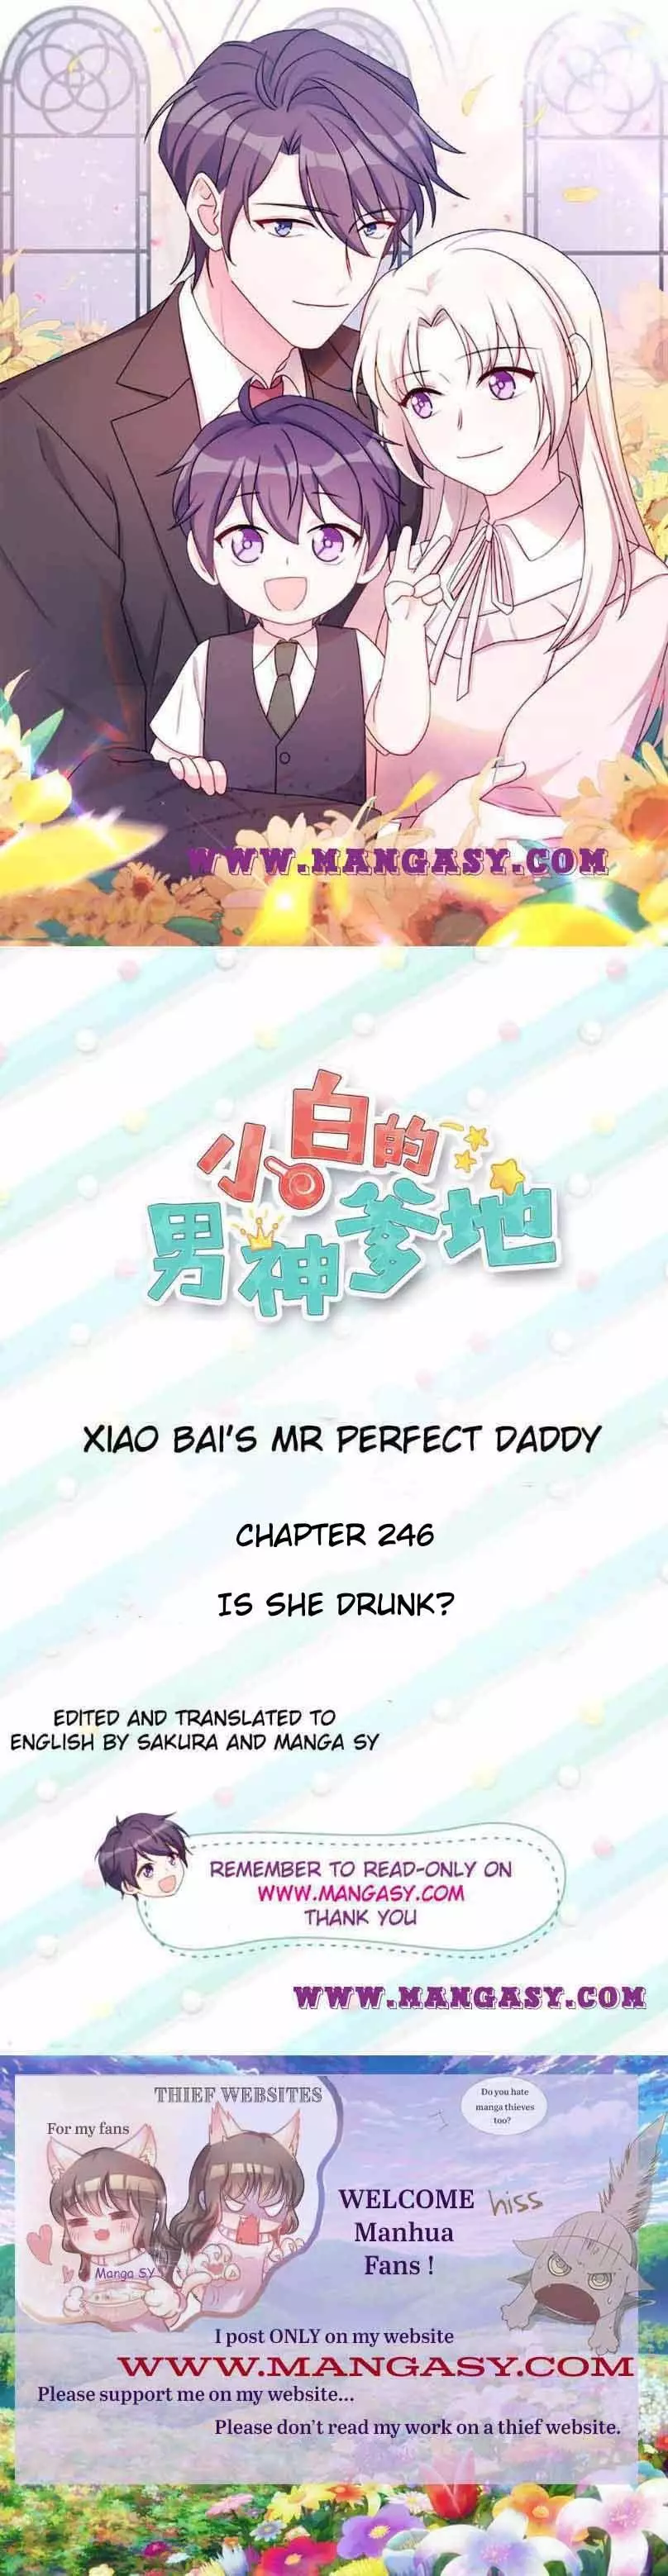 Xiao Bai’S Father Is A Wonderful Person - 246 page 1-14bea8af